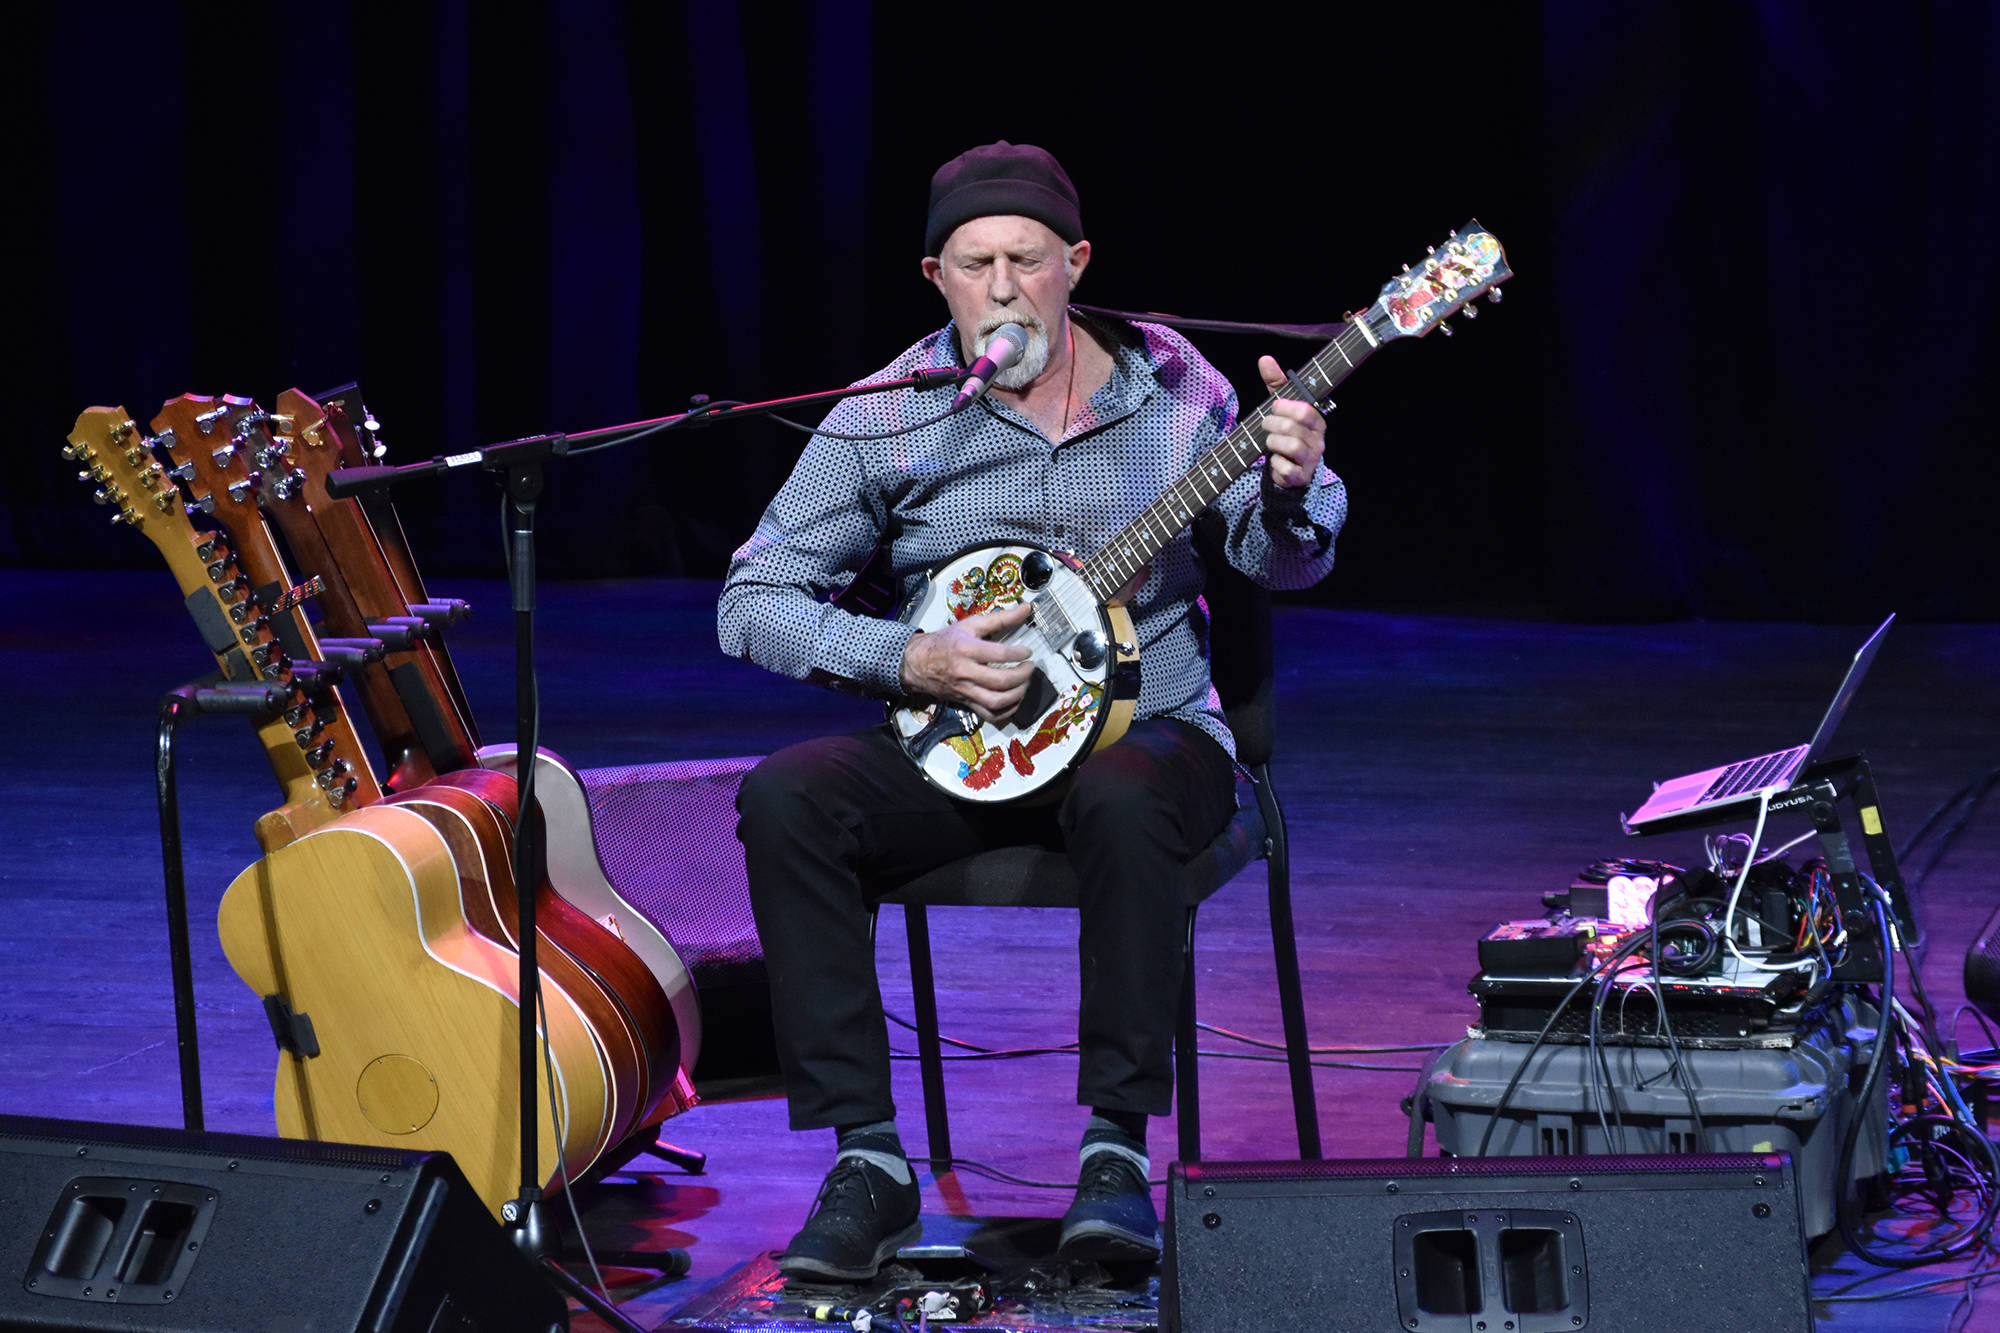 Harry Manx live at Venables Theatre on July 28. (Brennan Phillips - Western News)